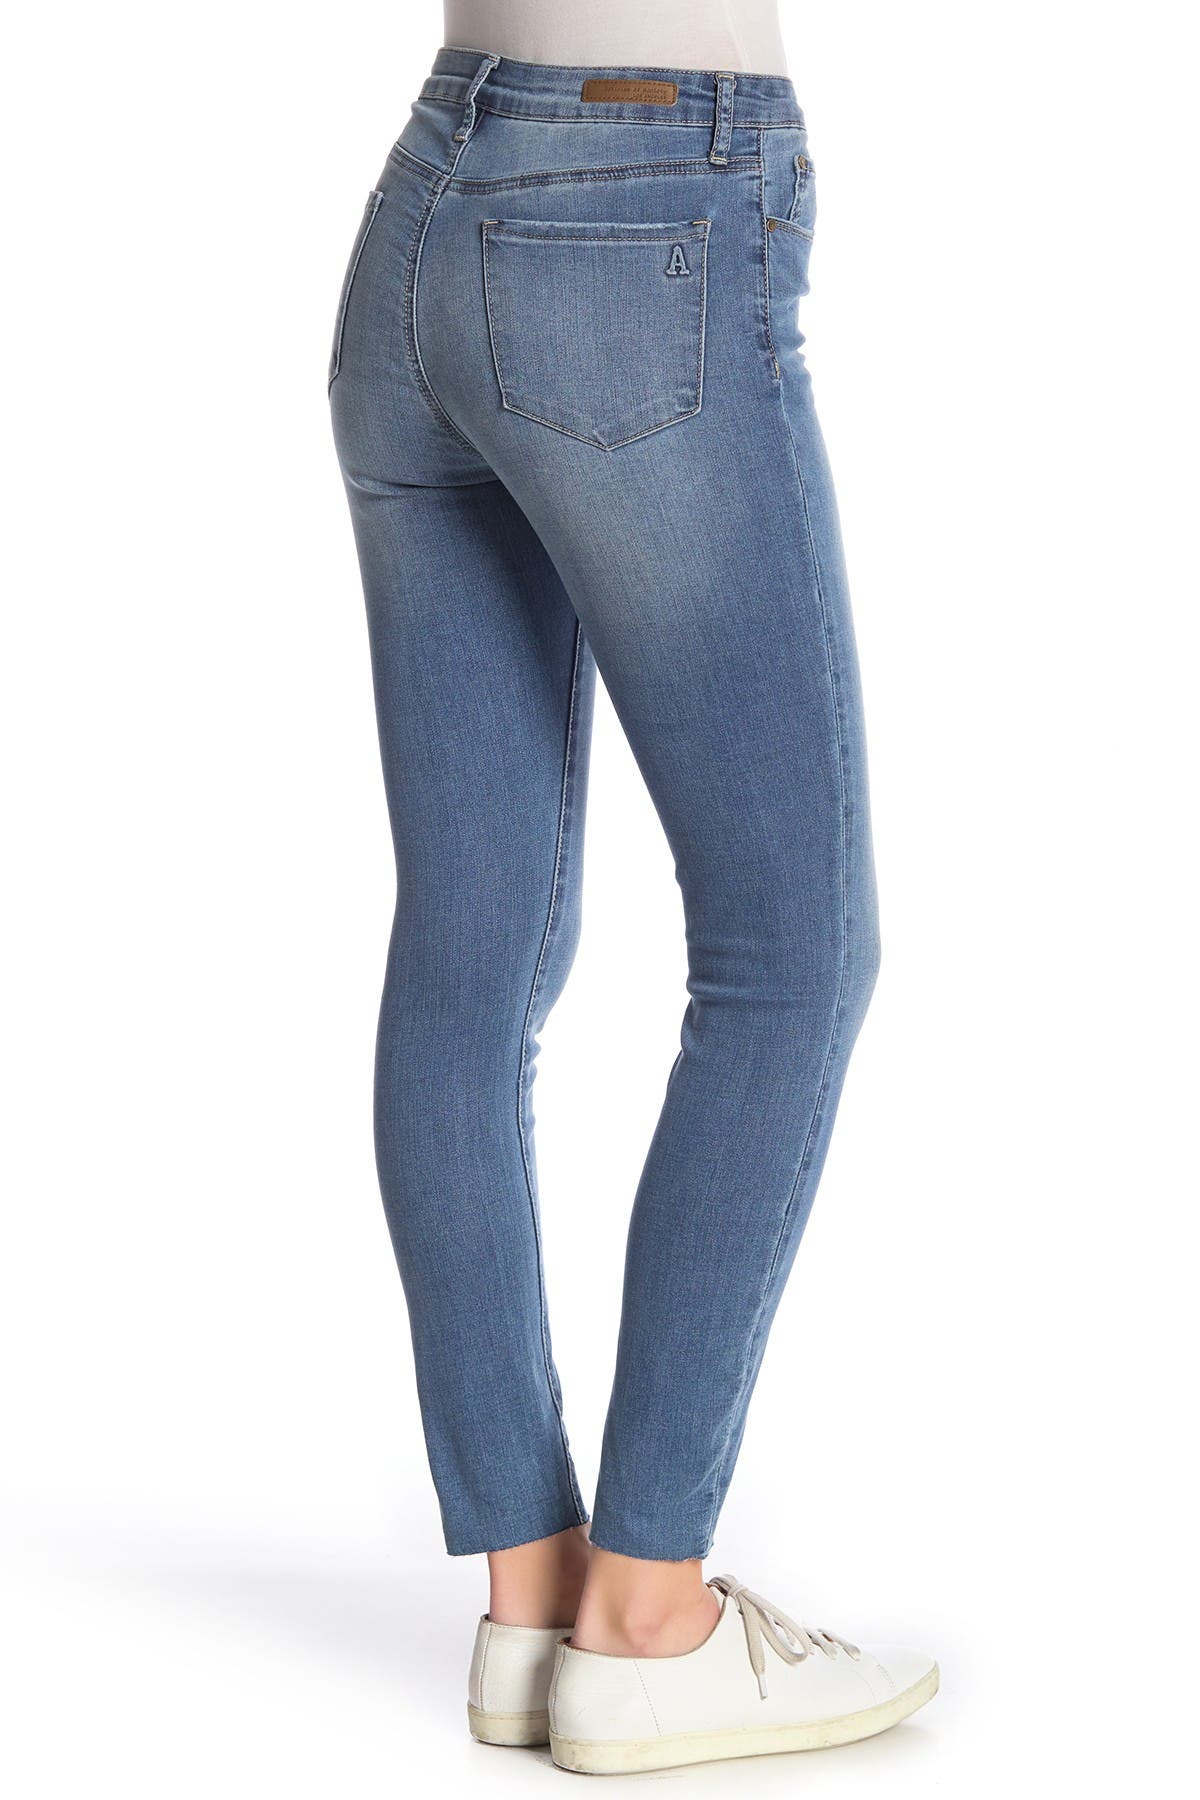 articles of society jeans heather high rise